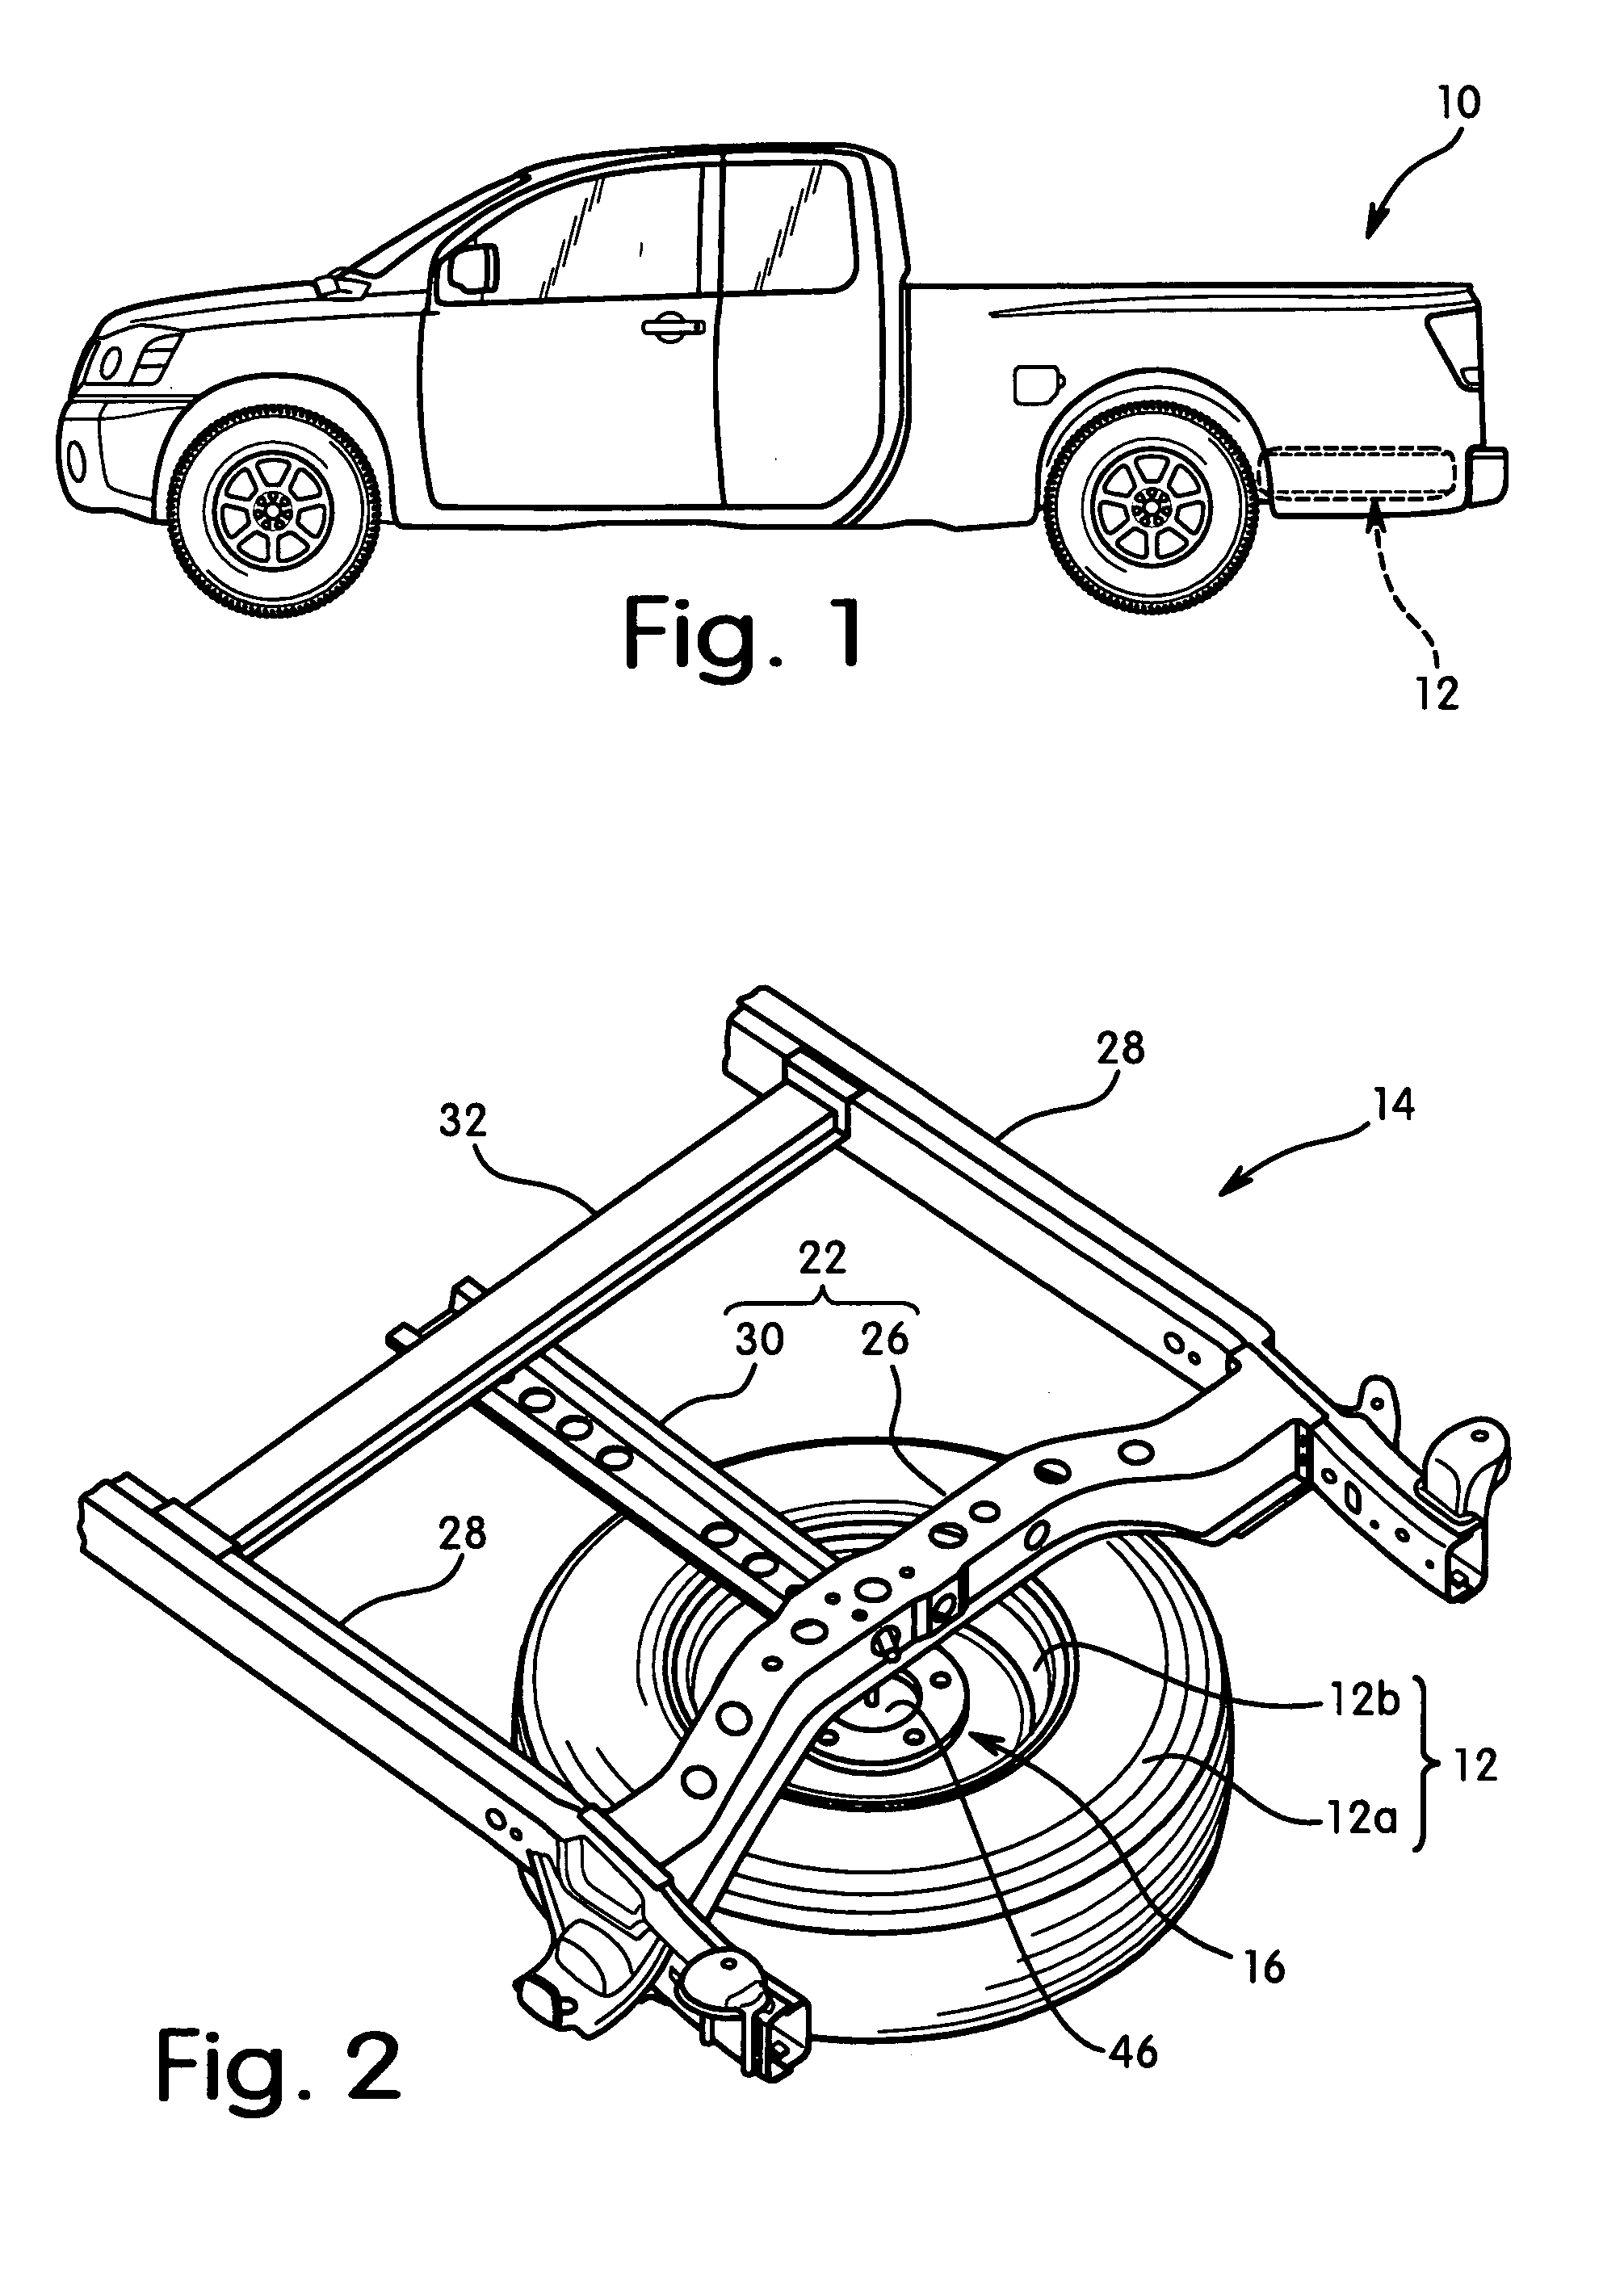 Vehicle spare tire pressure detection assembly